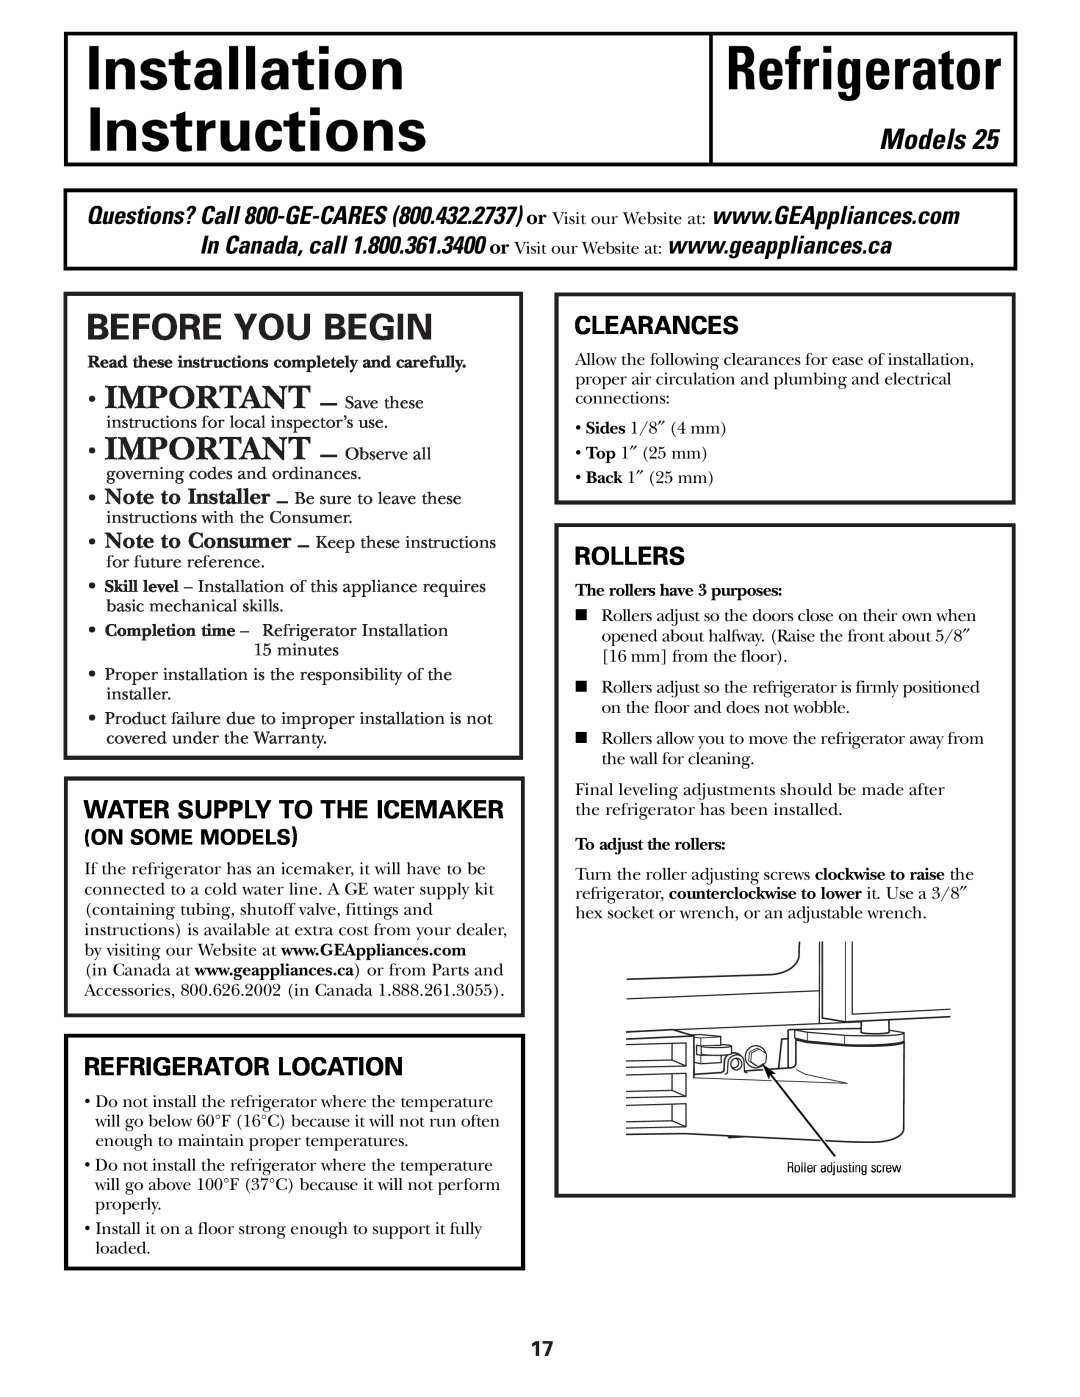 GE 25 Installation Instructions, Before You Begin, Models, Refrigerator Location, Clearances, Rollers 